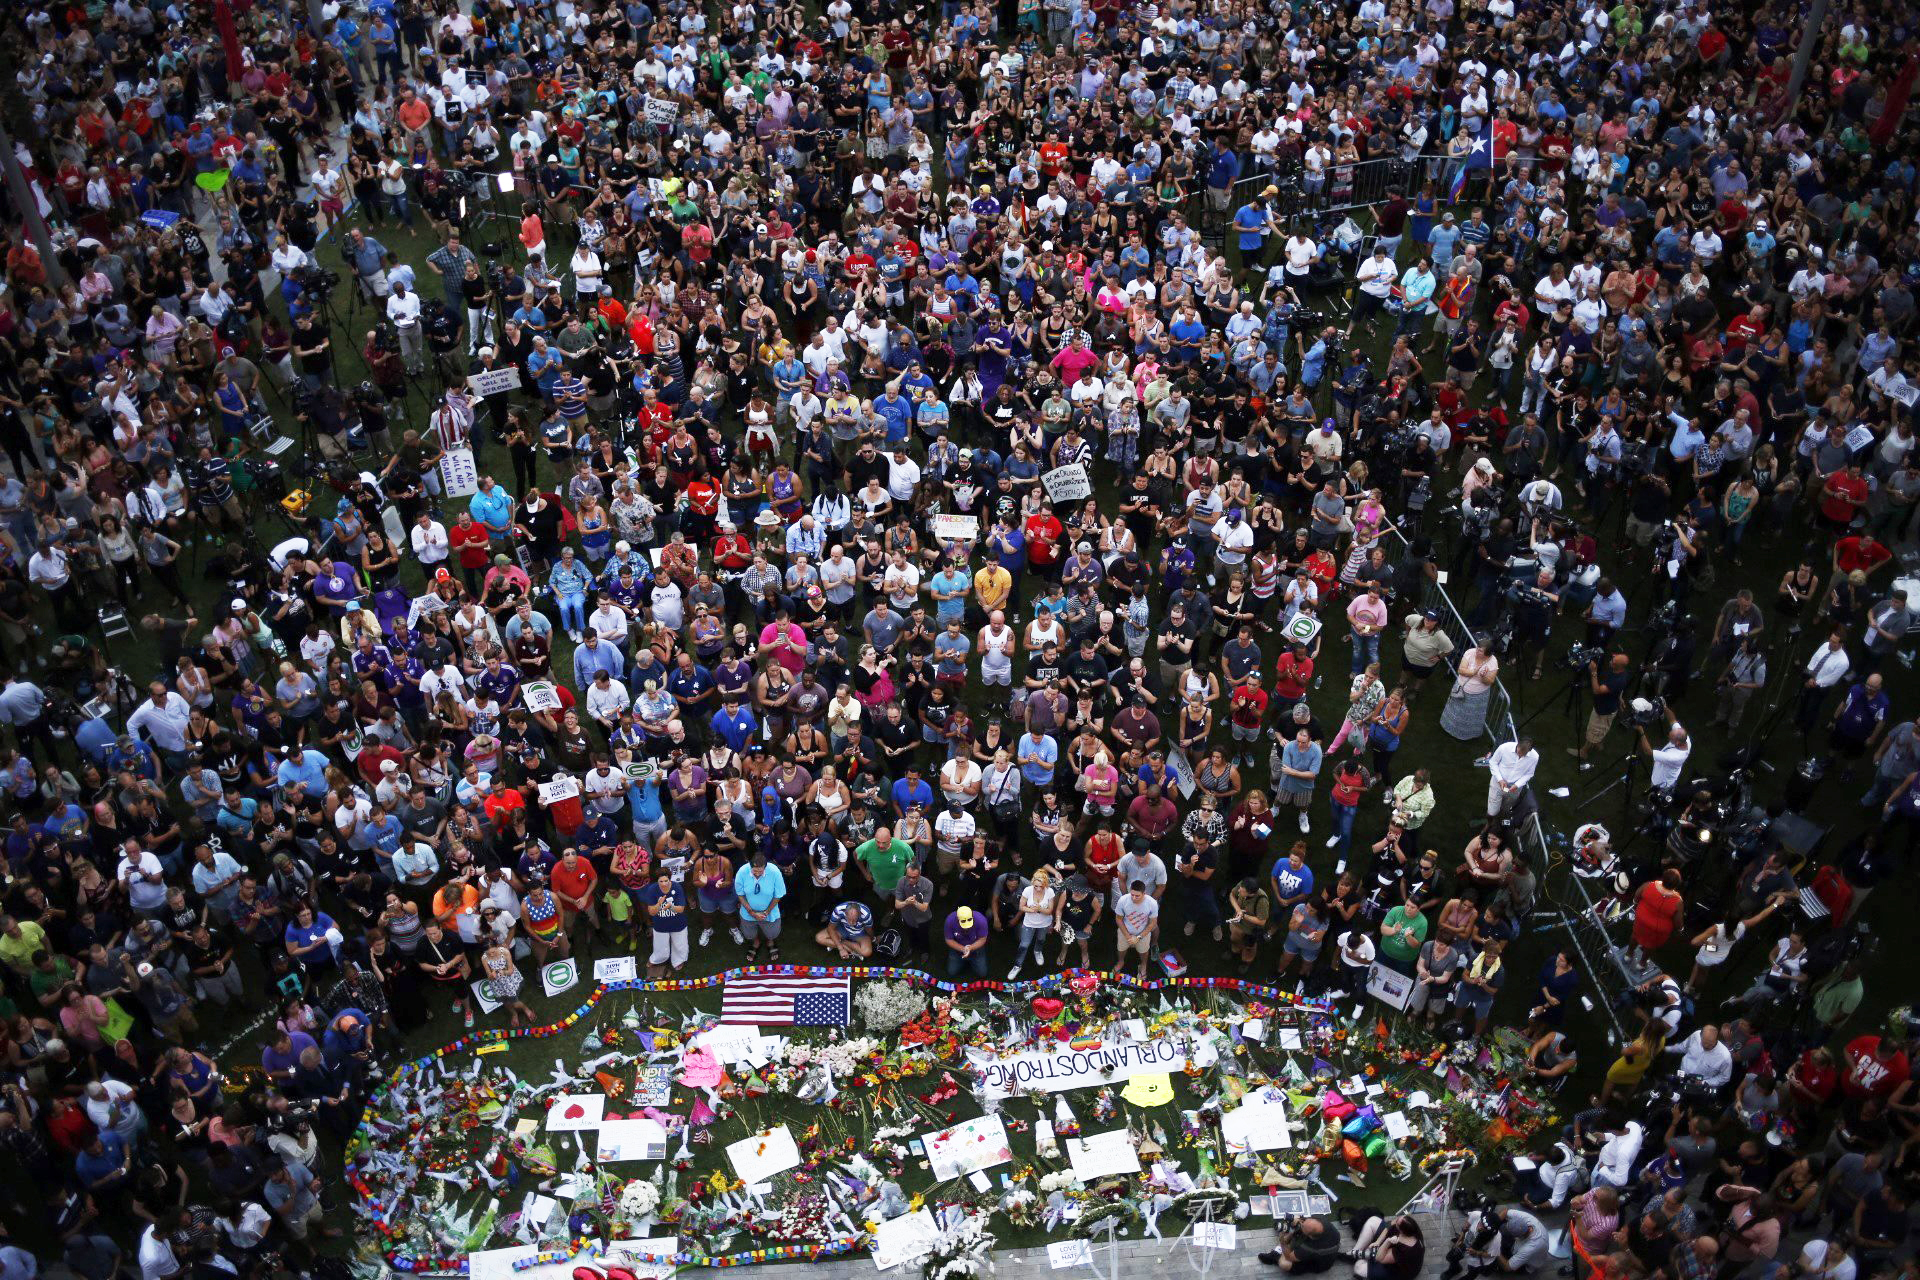 Hundreds of people gather at a memorial outside of the Dr. Phillips Center for the Performing Arts in Orlando, Fla., on June 13, 2016.